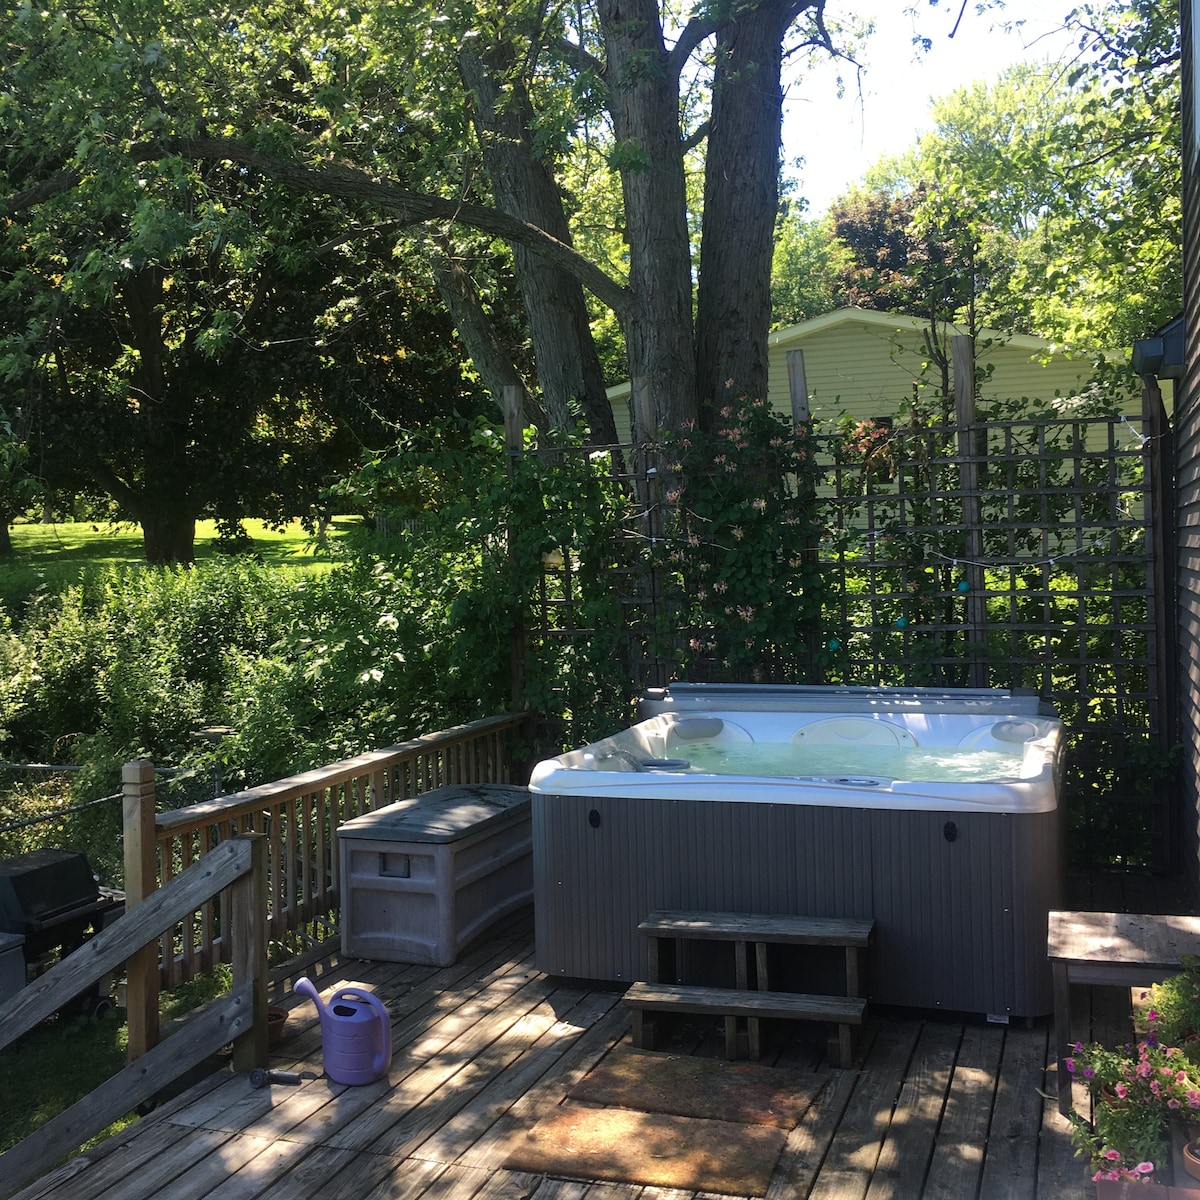 Great house with pool AND hot tub in Tburg Village